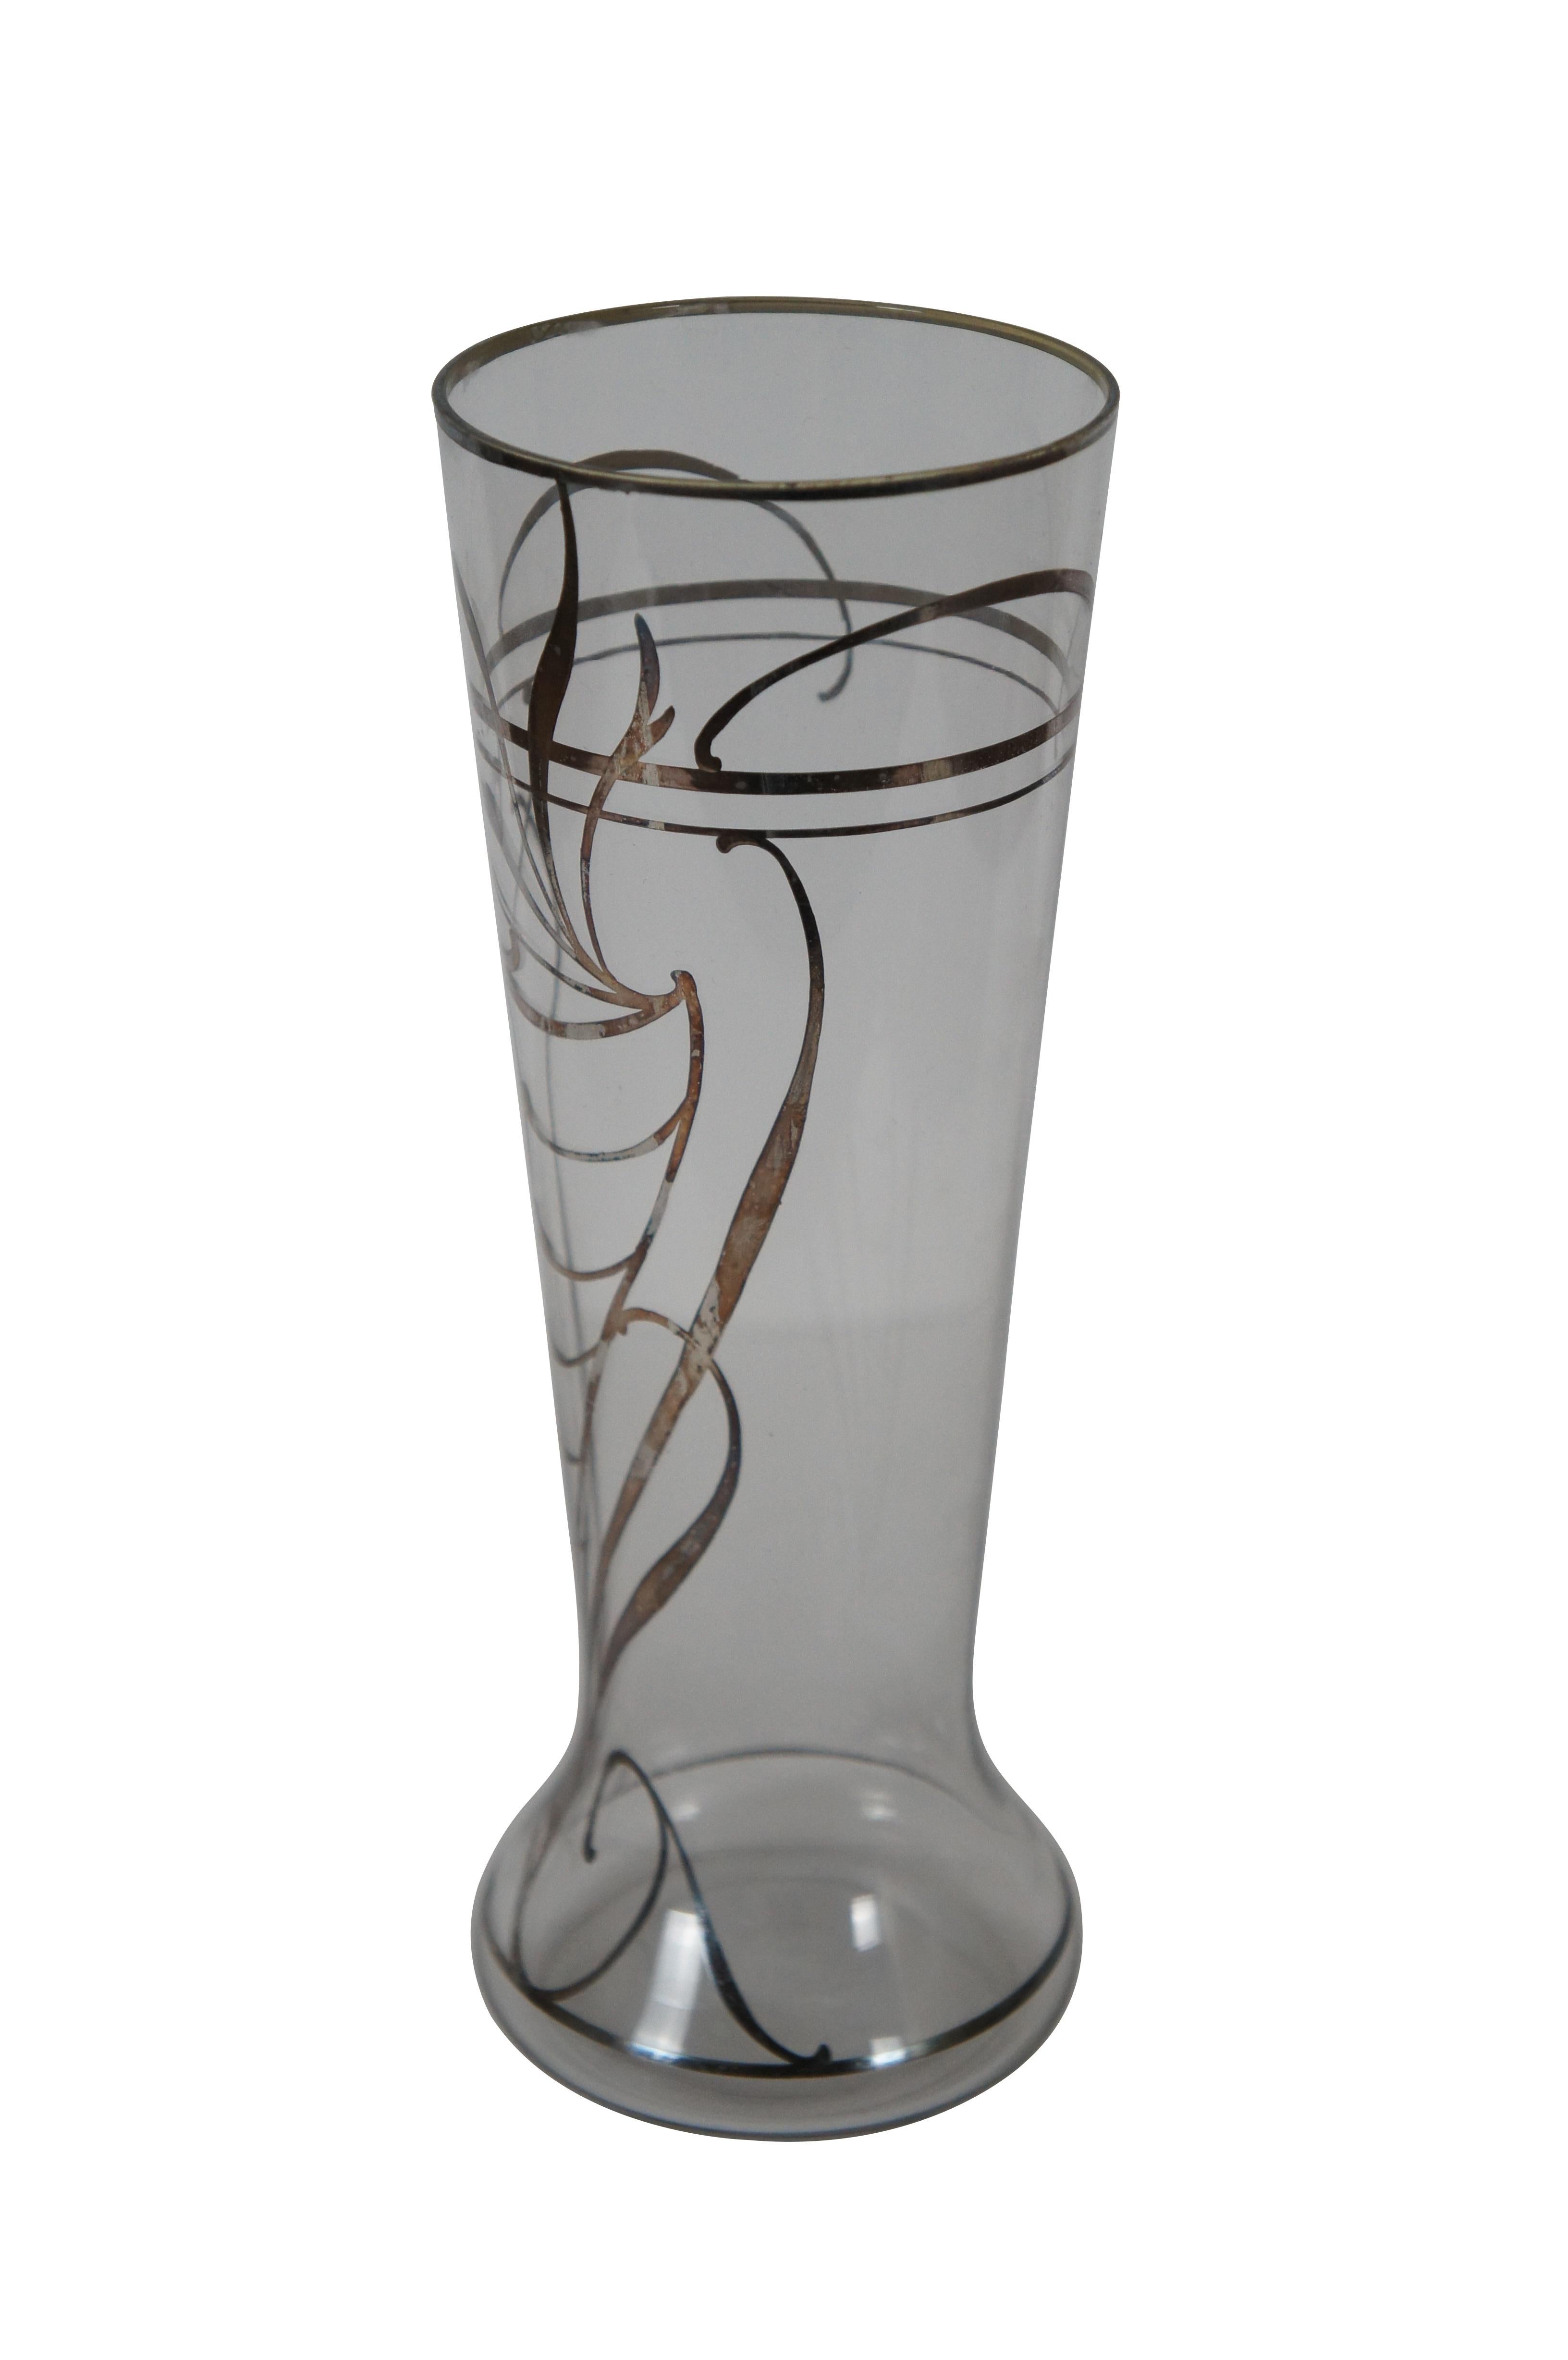 Antique clear glass vase with a slight trumpet / beer glass shape, overlaid with sterling silver in a semi-abstract Art Nouveau style cornucopia and swirling accents. 

Dimensions:
3.5” x 9.25” (Diameter x Height)